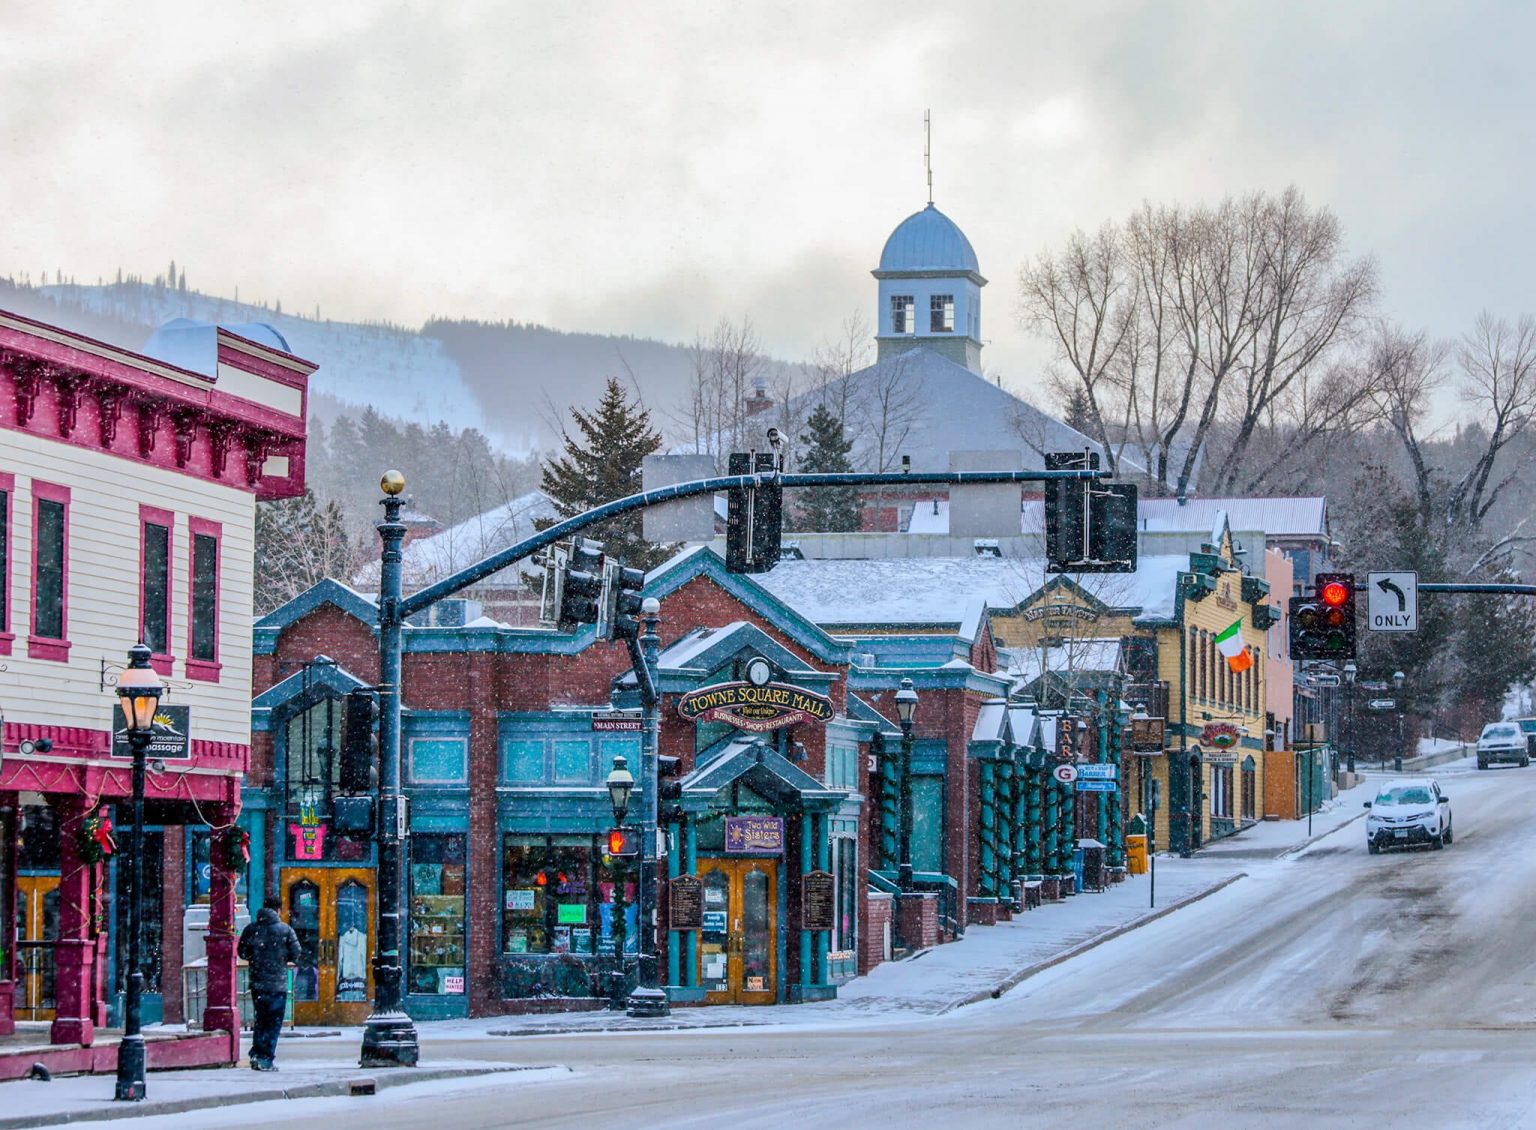 The Town of Breckenridge receiving snow in the early morning.